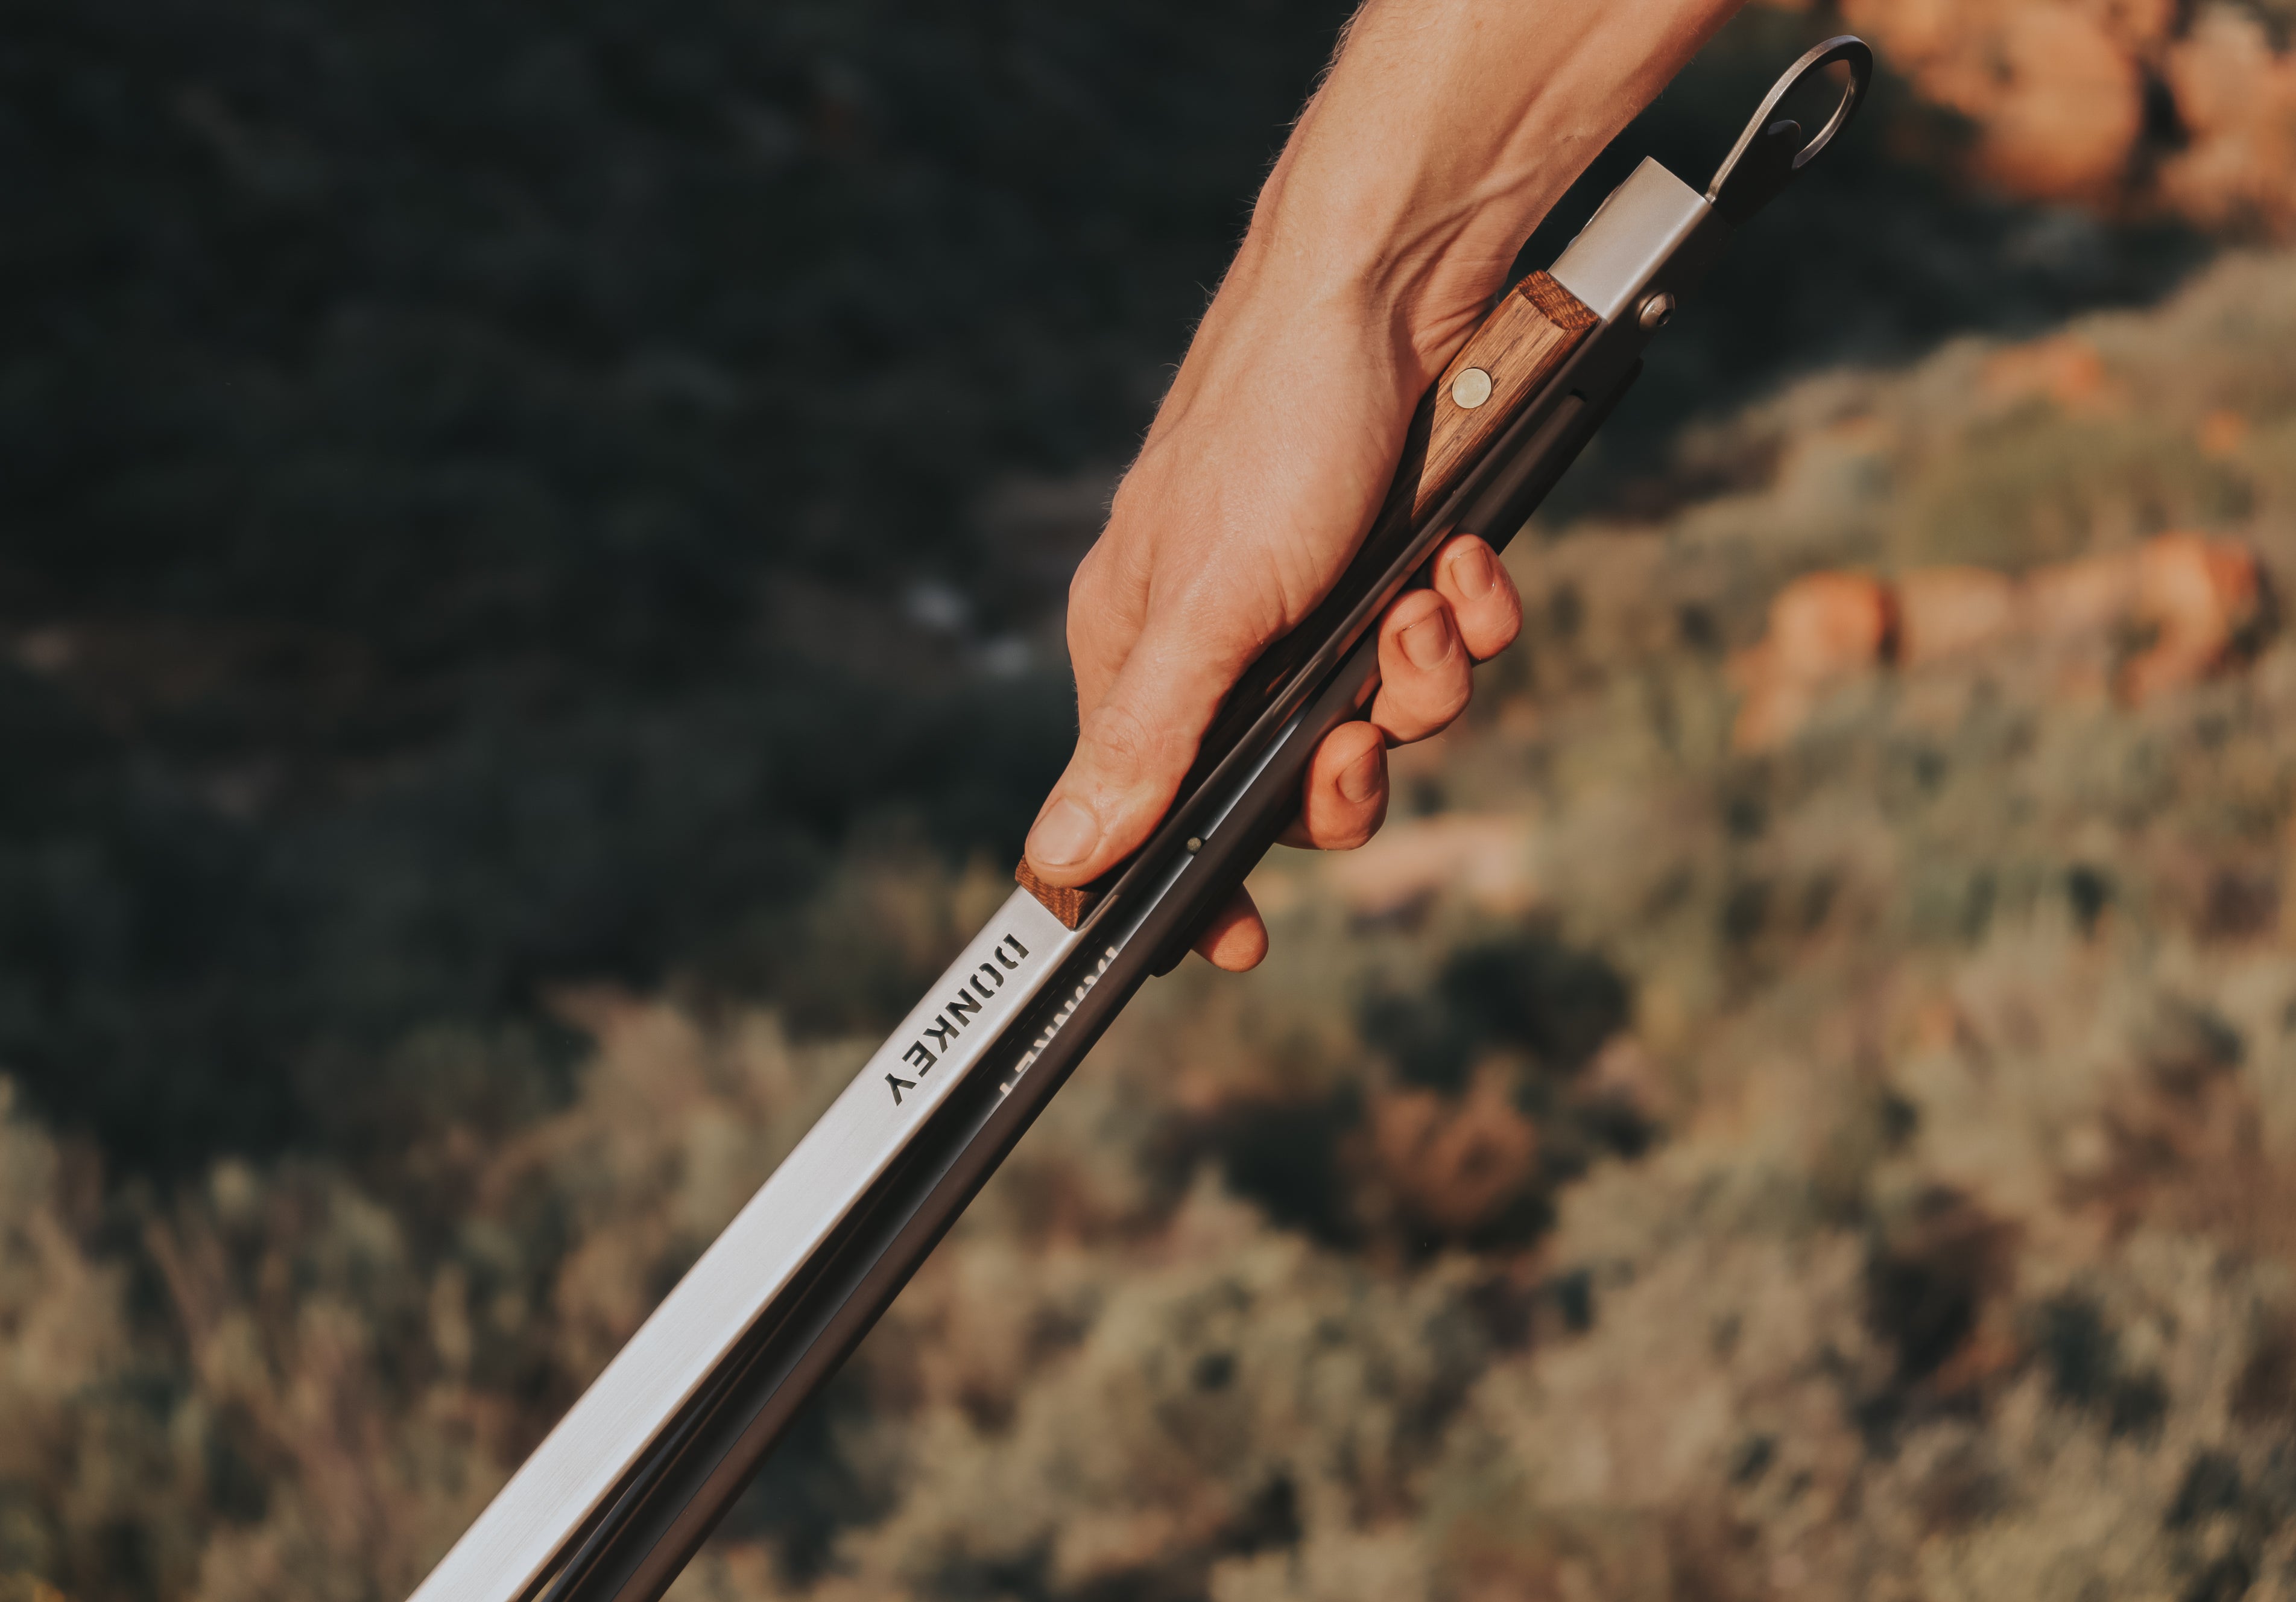 Stainless Steel Braai Tongs | A Worthy Investment